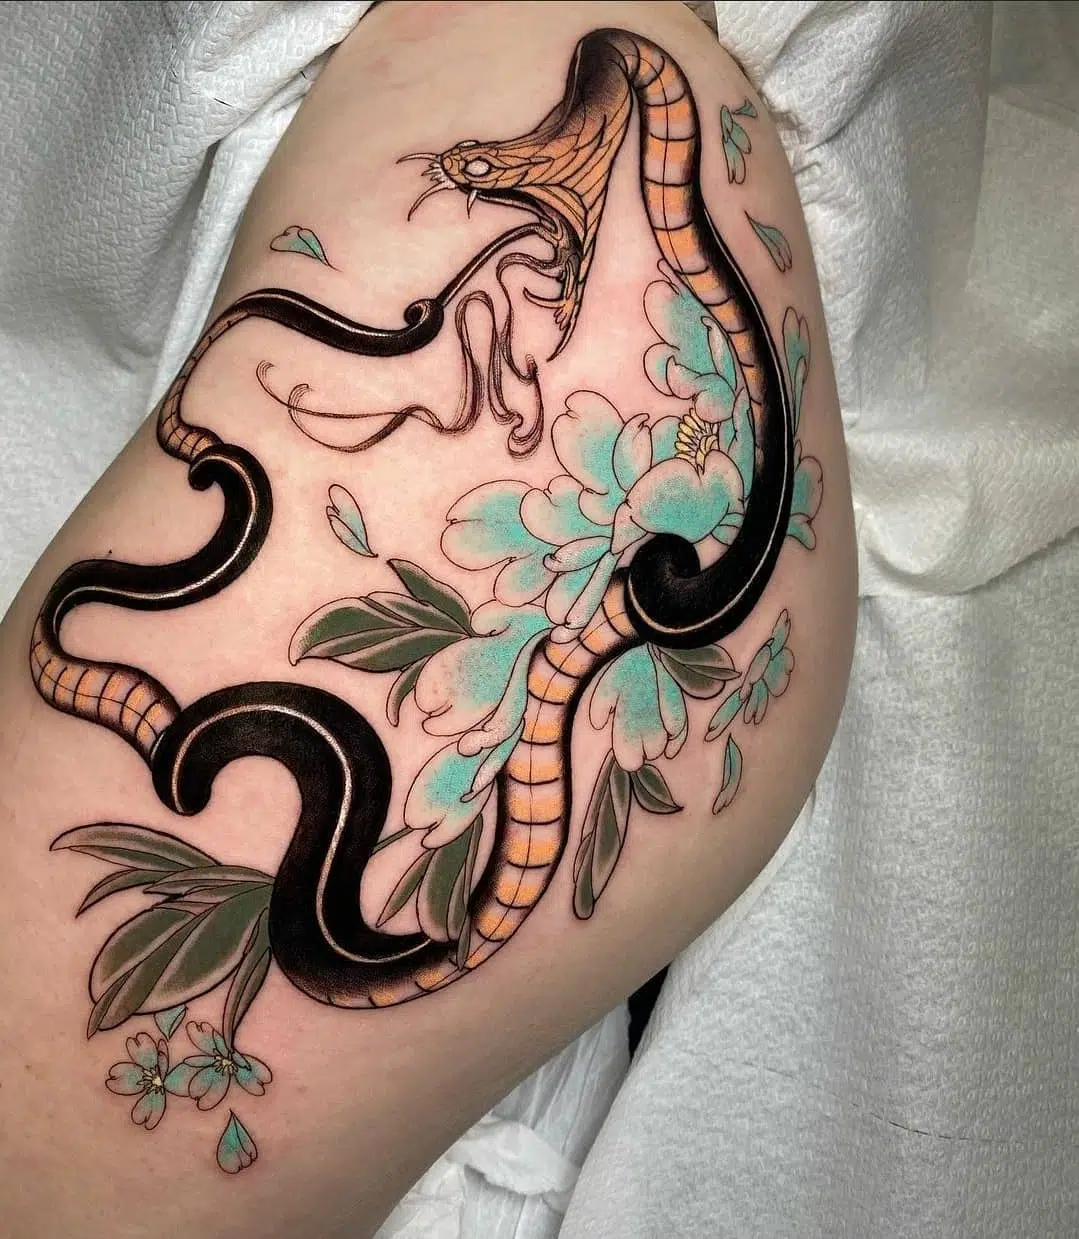 An original take on an ouroboros by the half Dutch half Brazilian bombshell Maiza Van Bommel. Huge respect to Charlotte for sitting through this session without flinching.